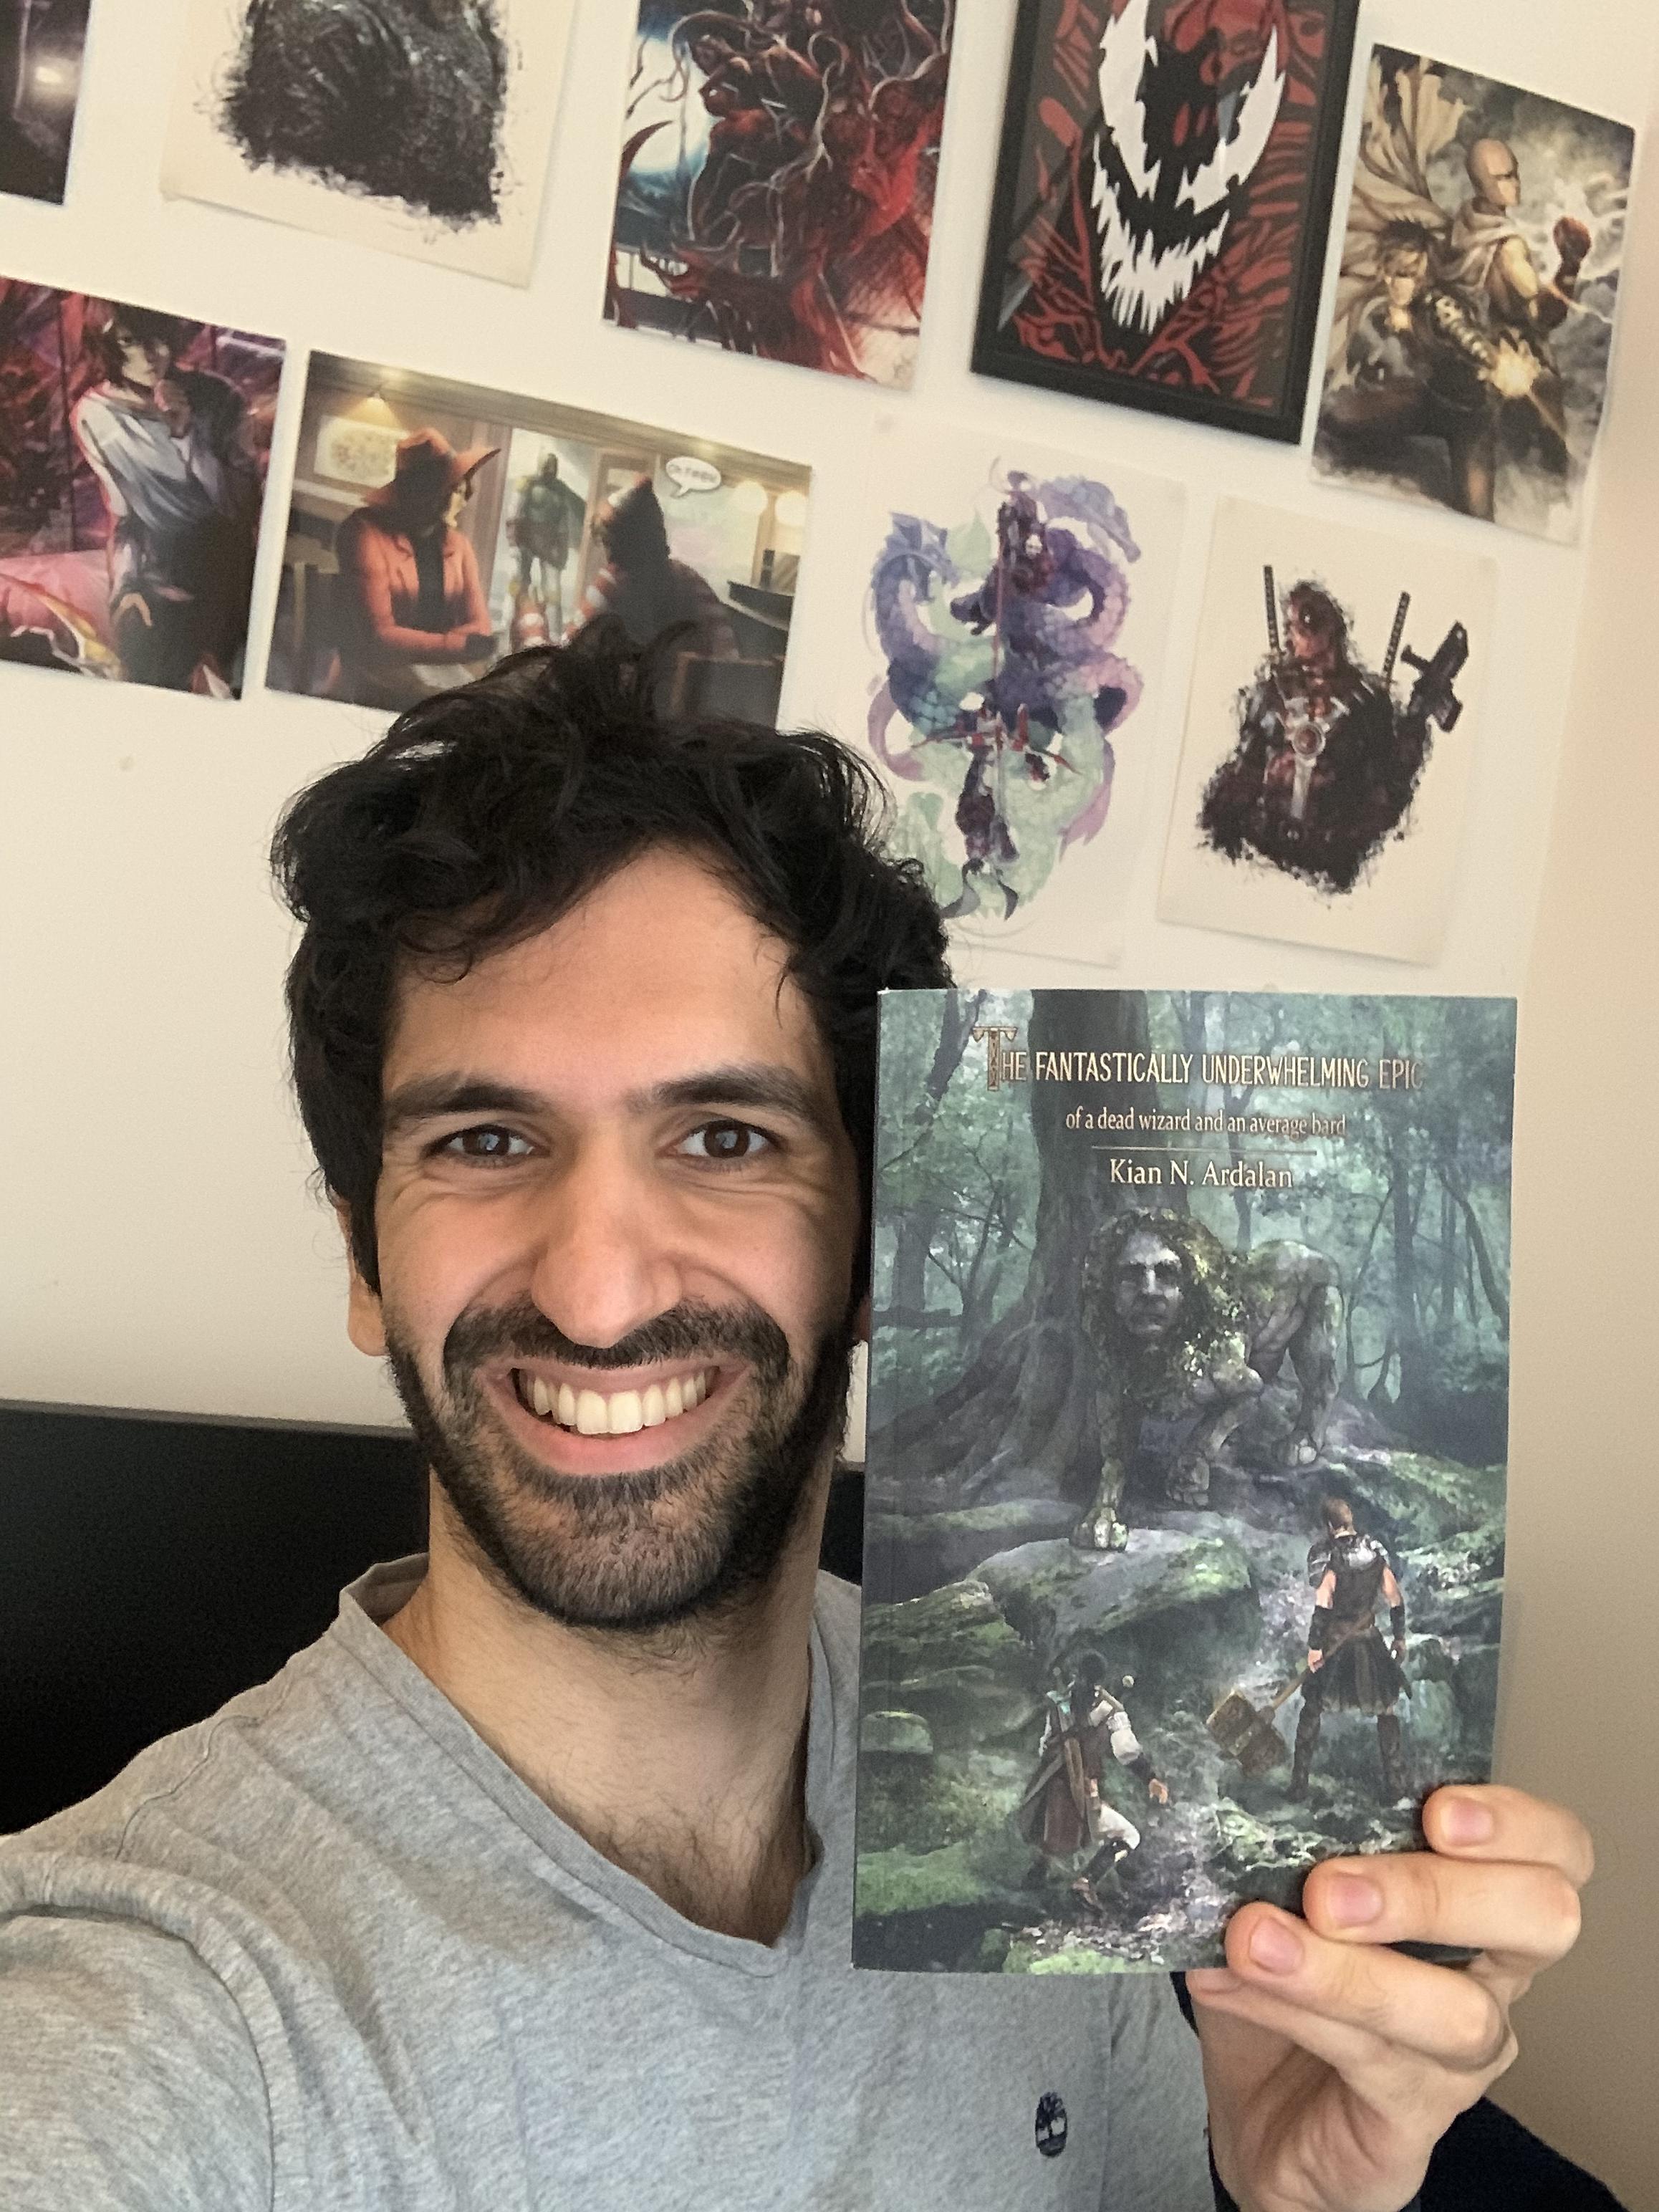 r/pics - A project I started two years ago on Reddit is now a 500 page fantasy novel!